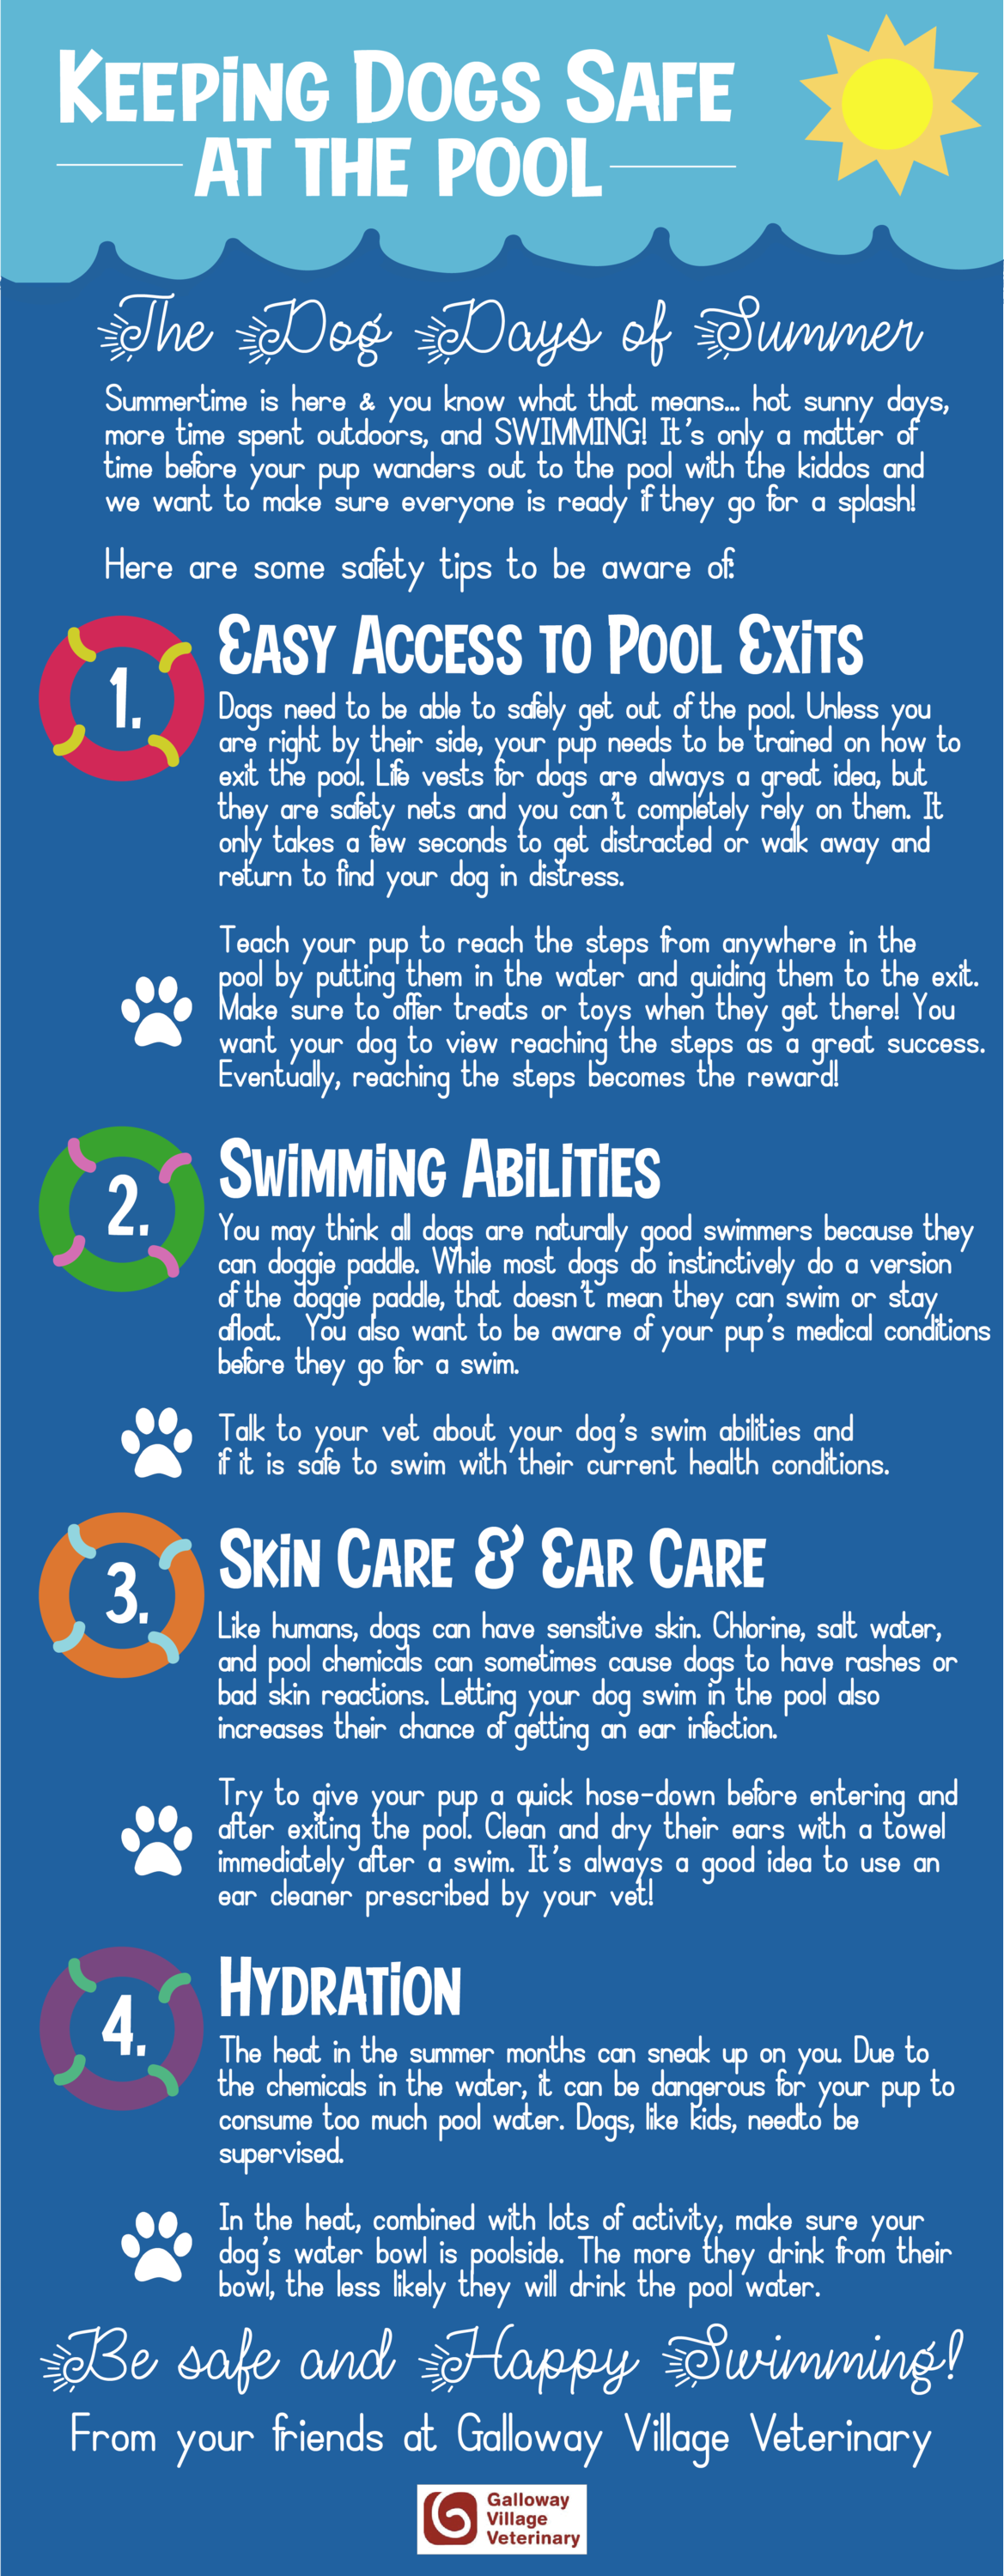 4 tips for keeping dogs safe at the pool this summer.